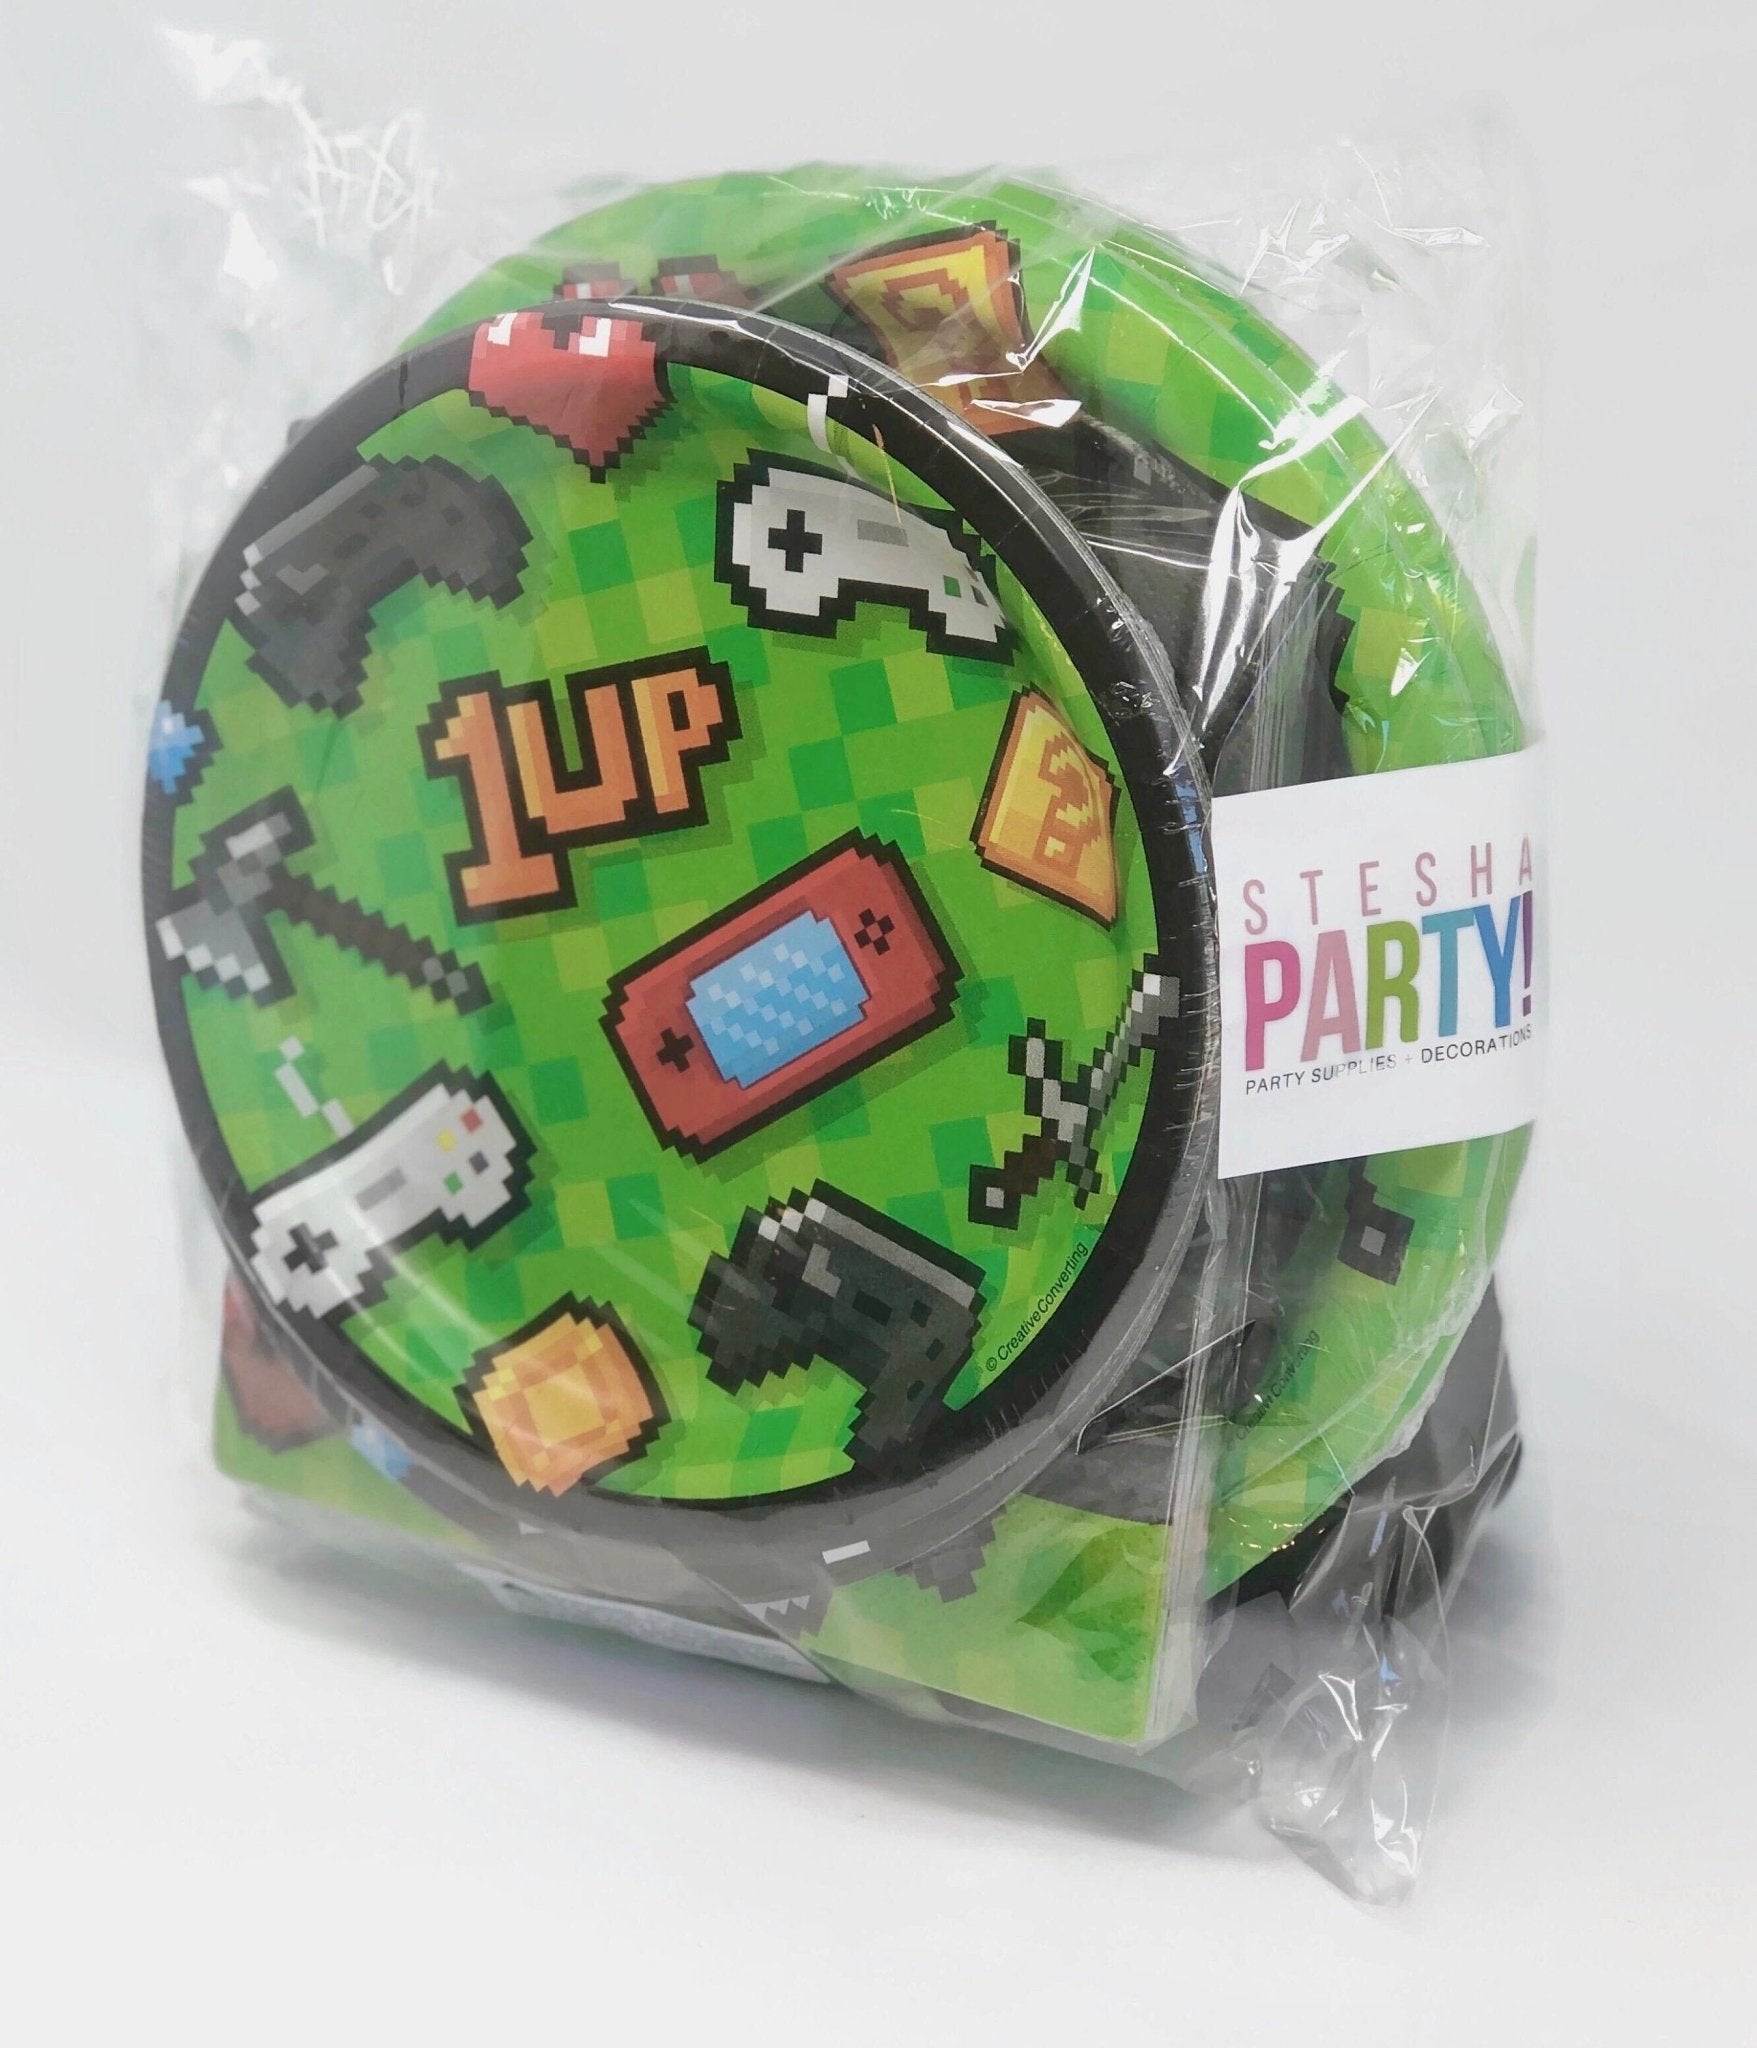 Video Game Party Pack Set - Stesha Party